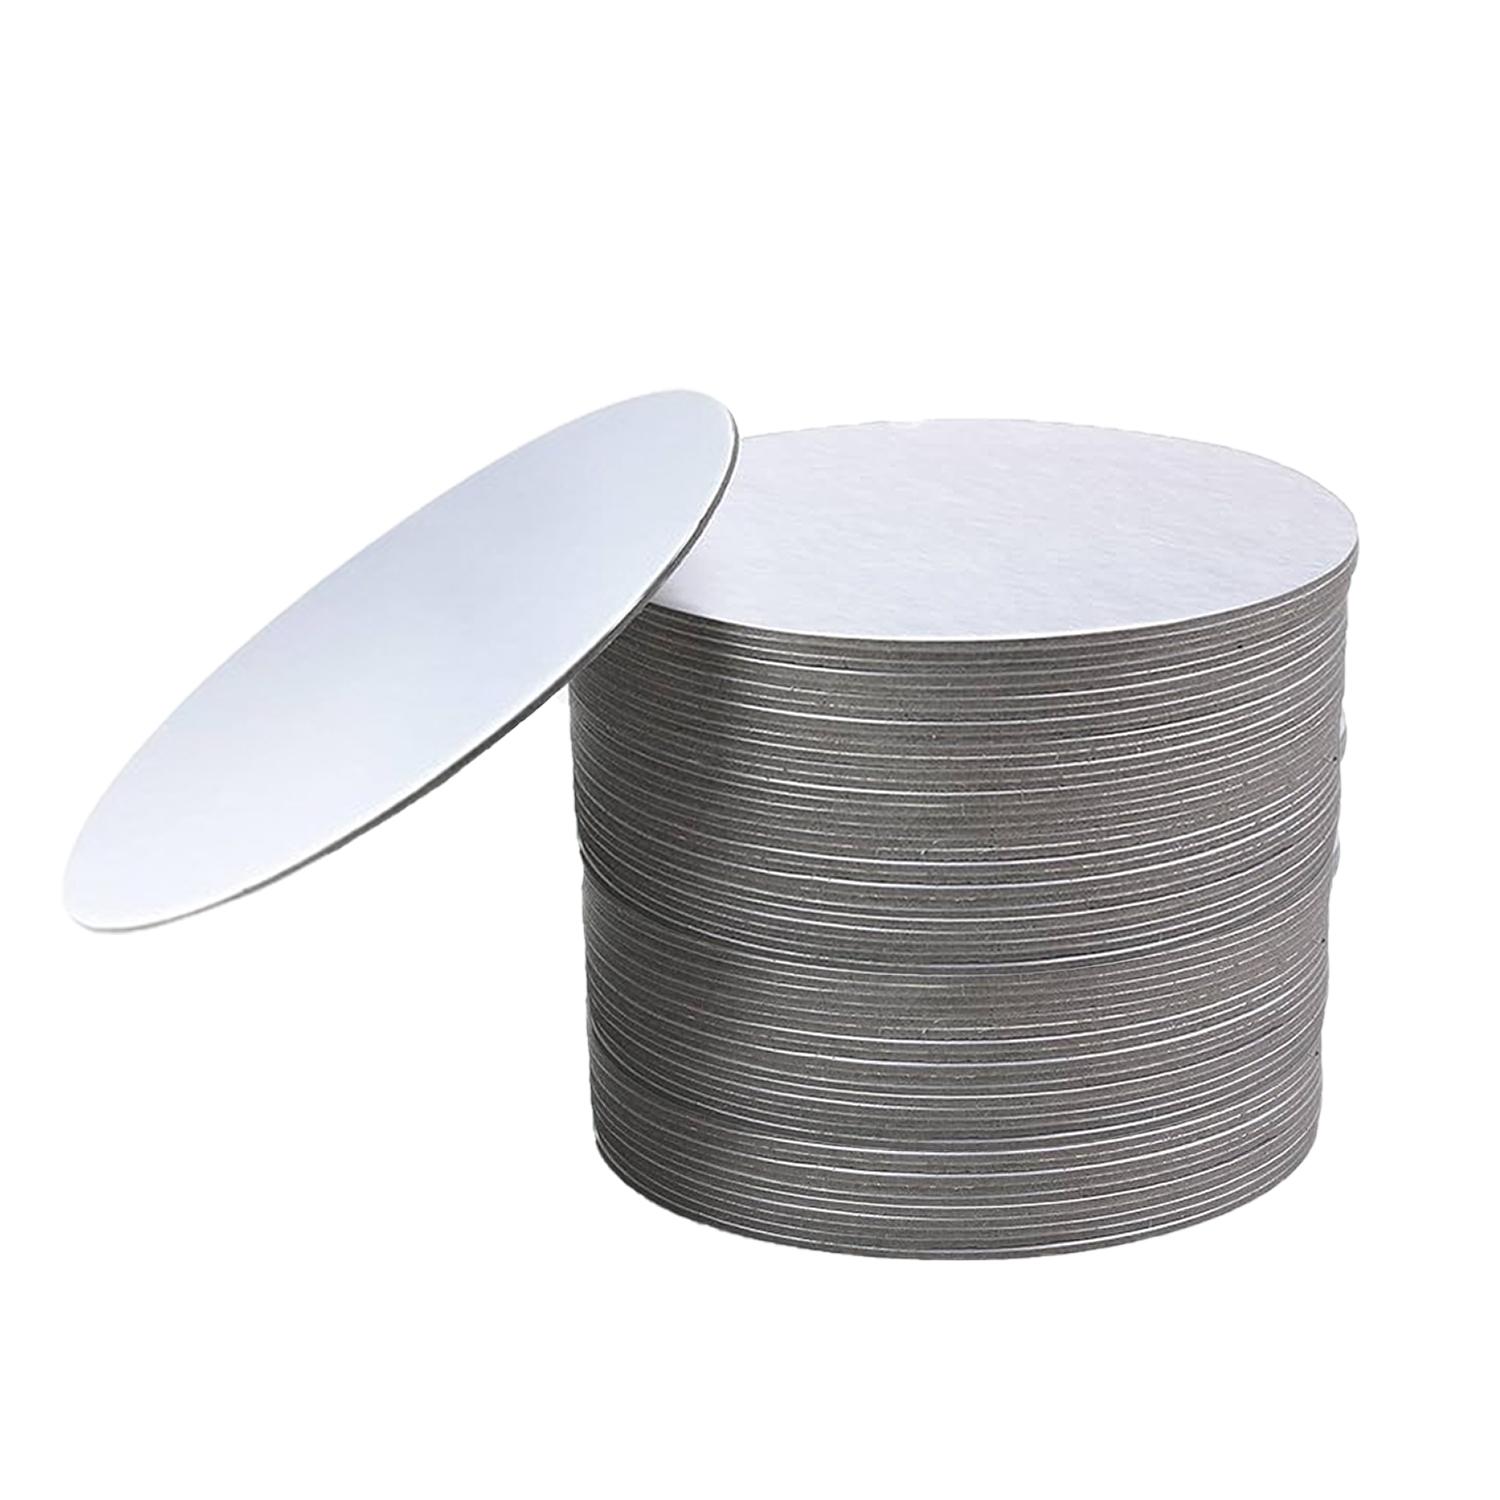 PACK OF 100 - 10'' ROUND SILVER CAKE BOARD